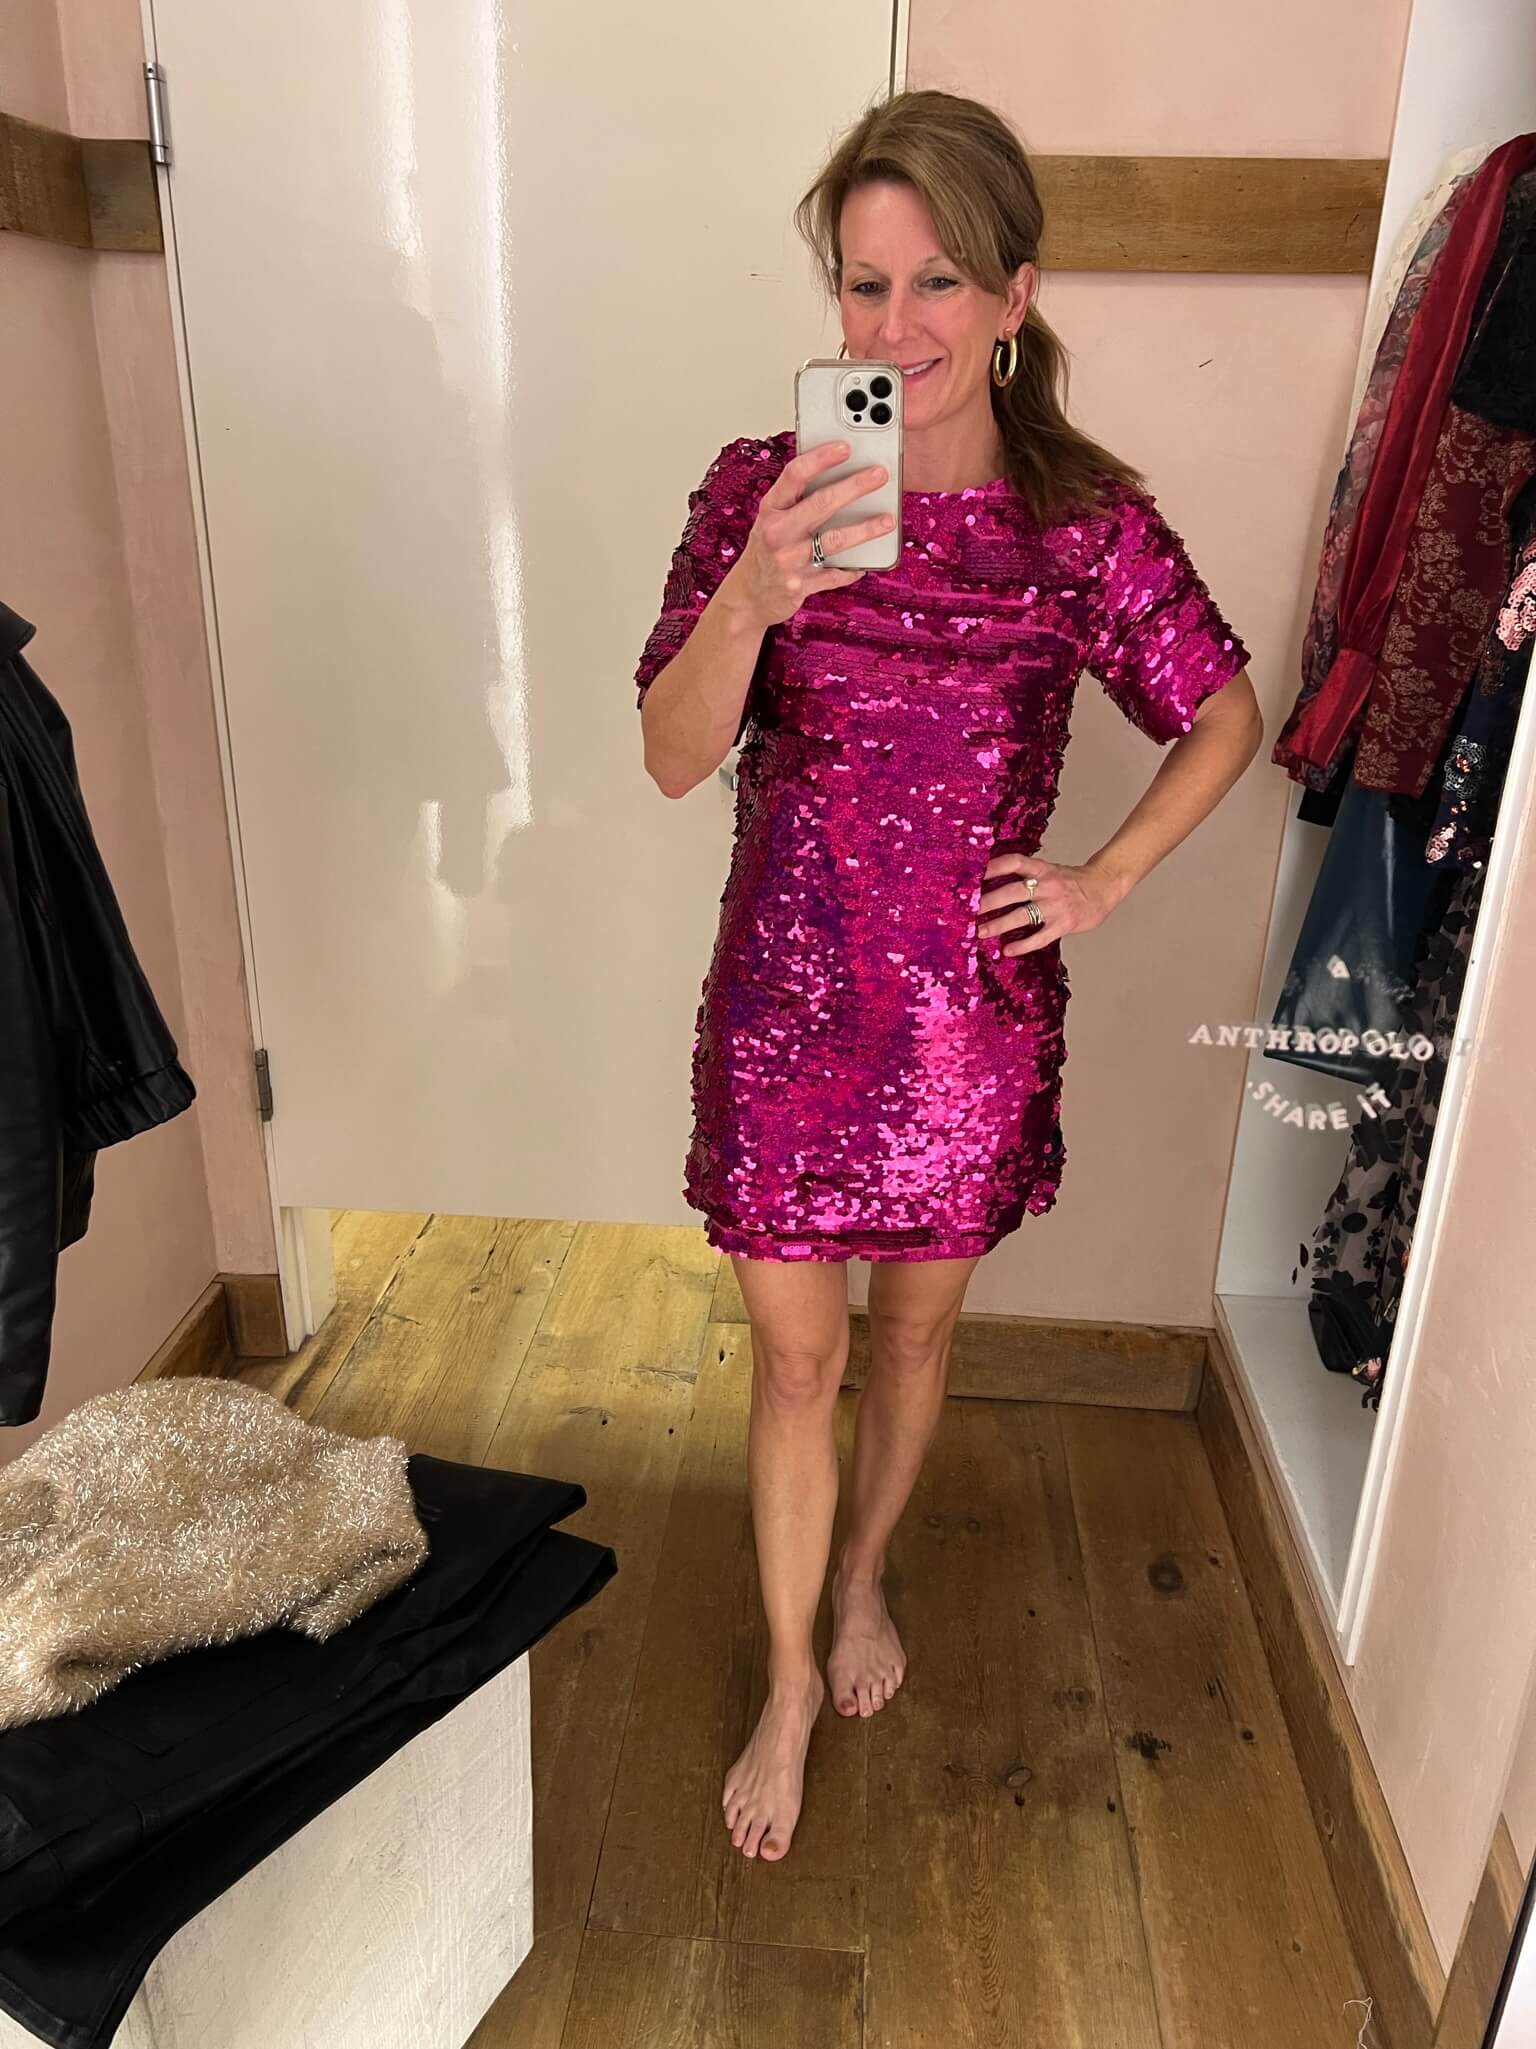 The Best Holiday Pieces At Anthropologie sequin sheath dress how to wear sequins for the holidays personal stylists share favorite pieces for the holidays nashville stylists share fun looks for holiday parties how to wear hot pink for the holidays out of the box colors for the holiday trending colors for the holidays